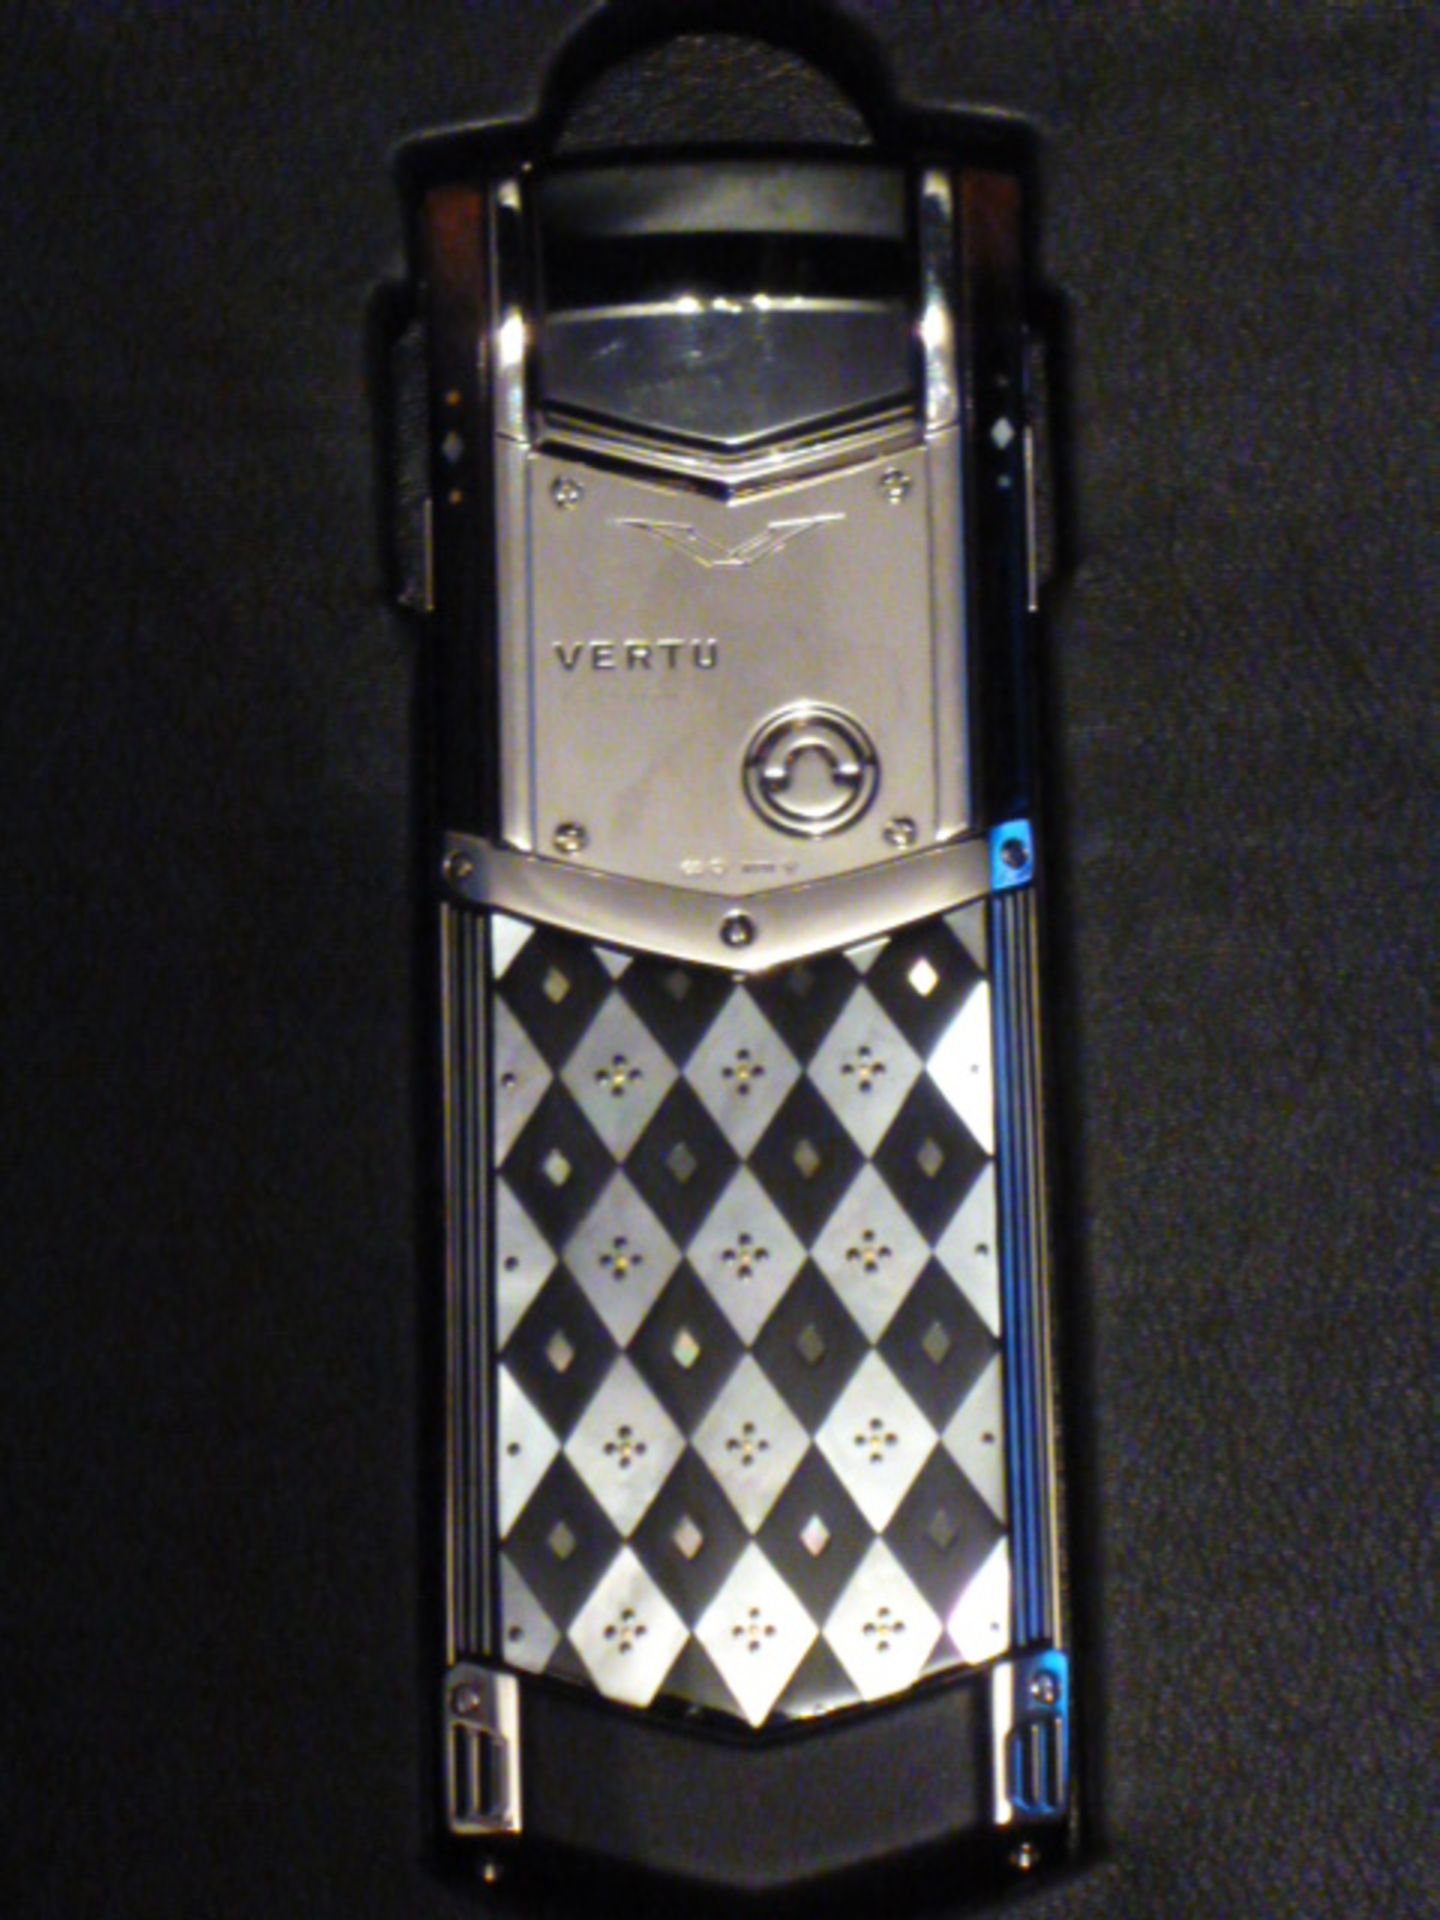 Vertu Signature Harmony Phone, Unique Design 1 of 4. This Handset has been Designed and Created - Image 3 of 6